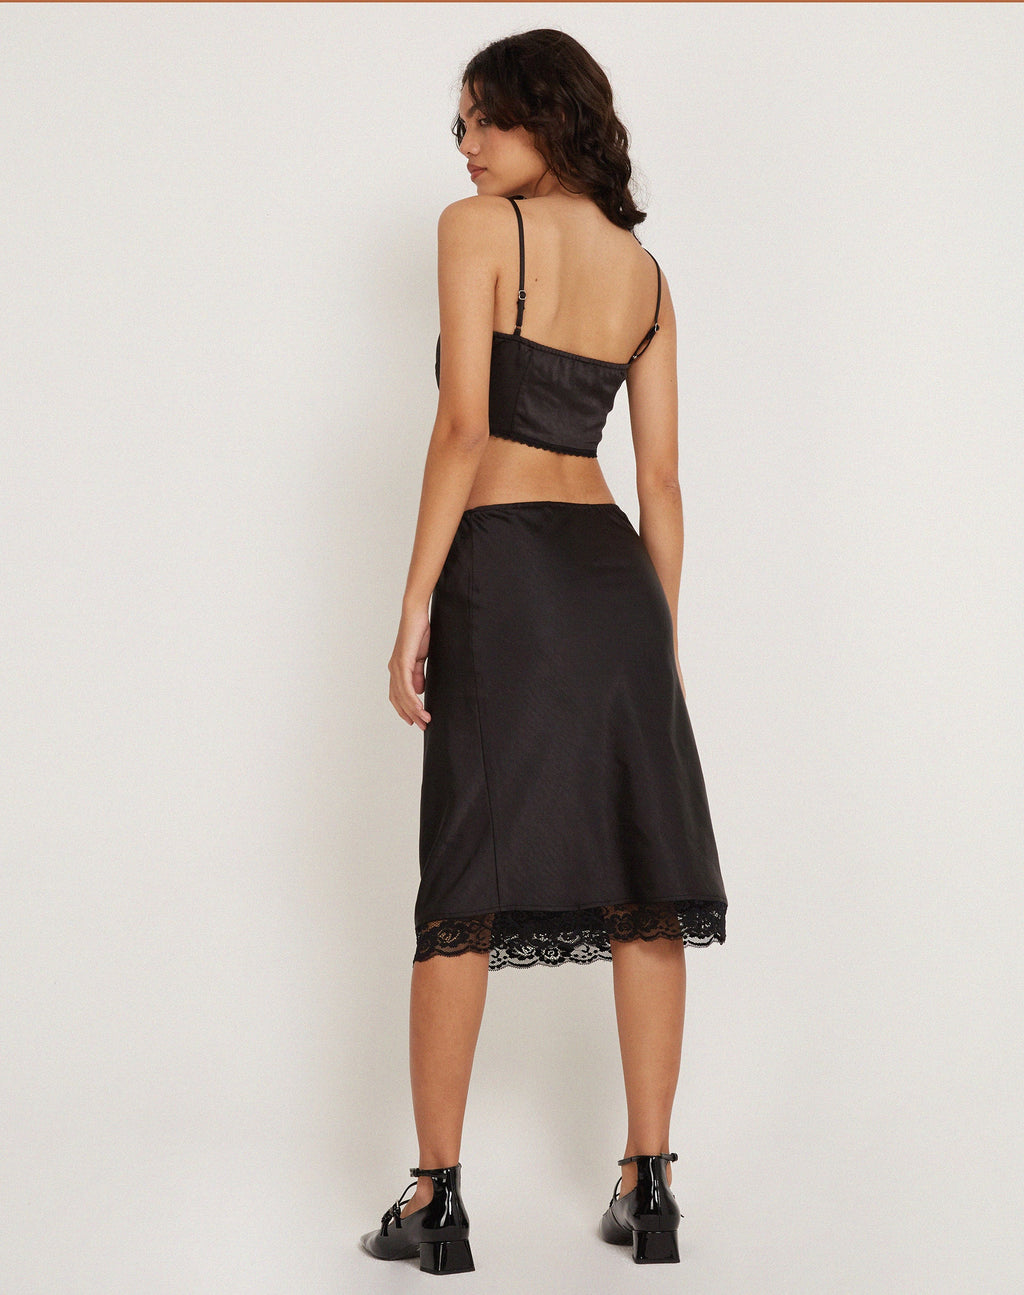 Resira Midi Skirt in Satin Pearled Black with Lace